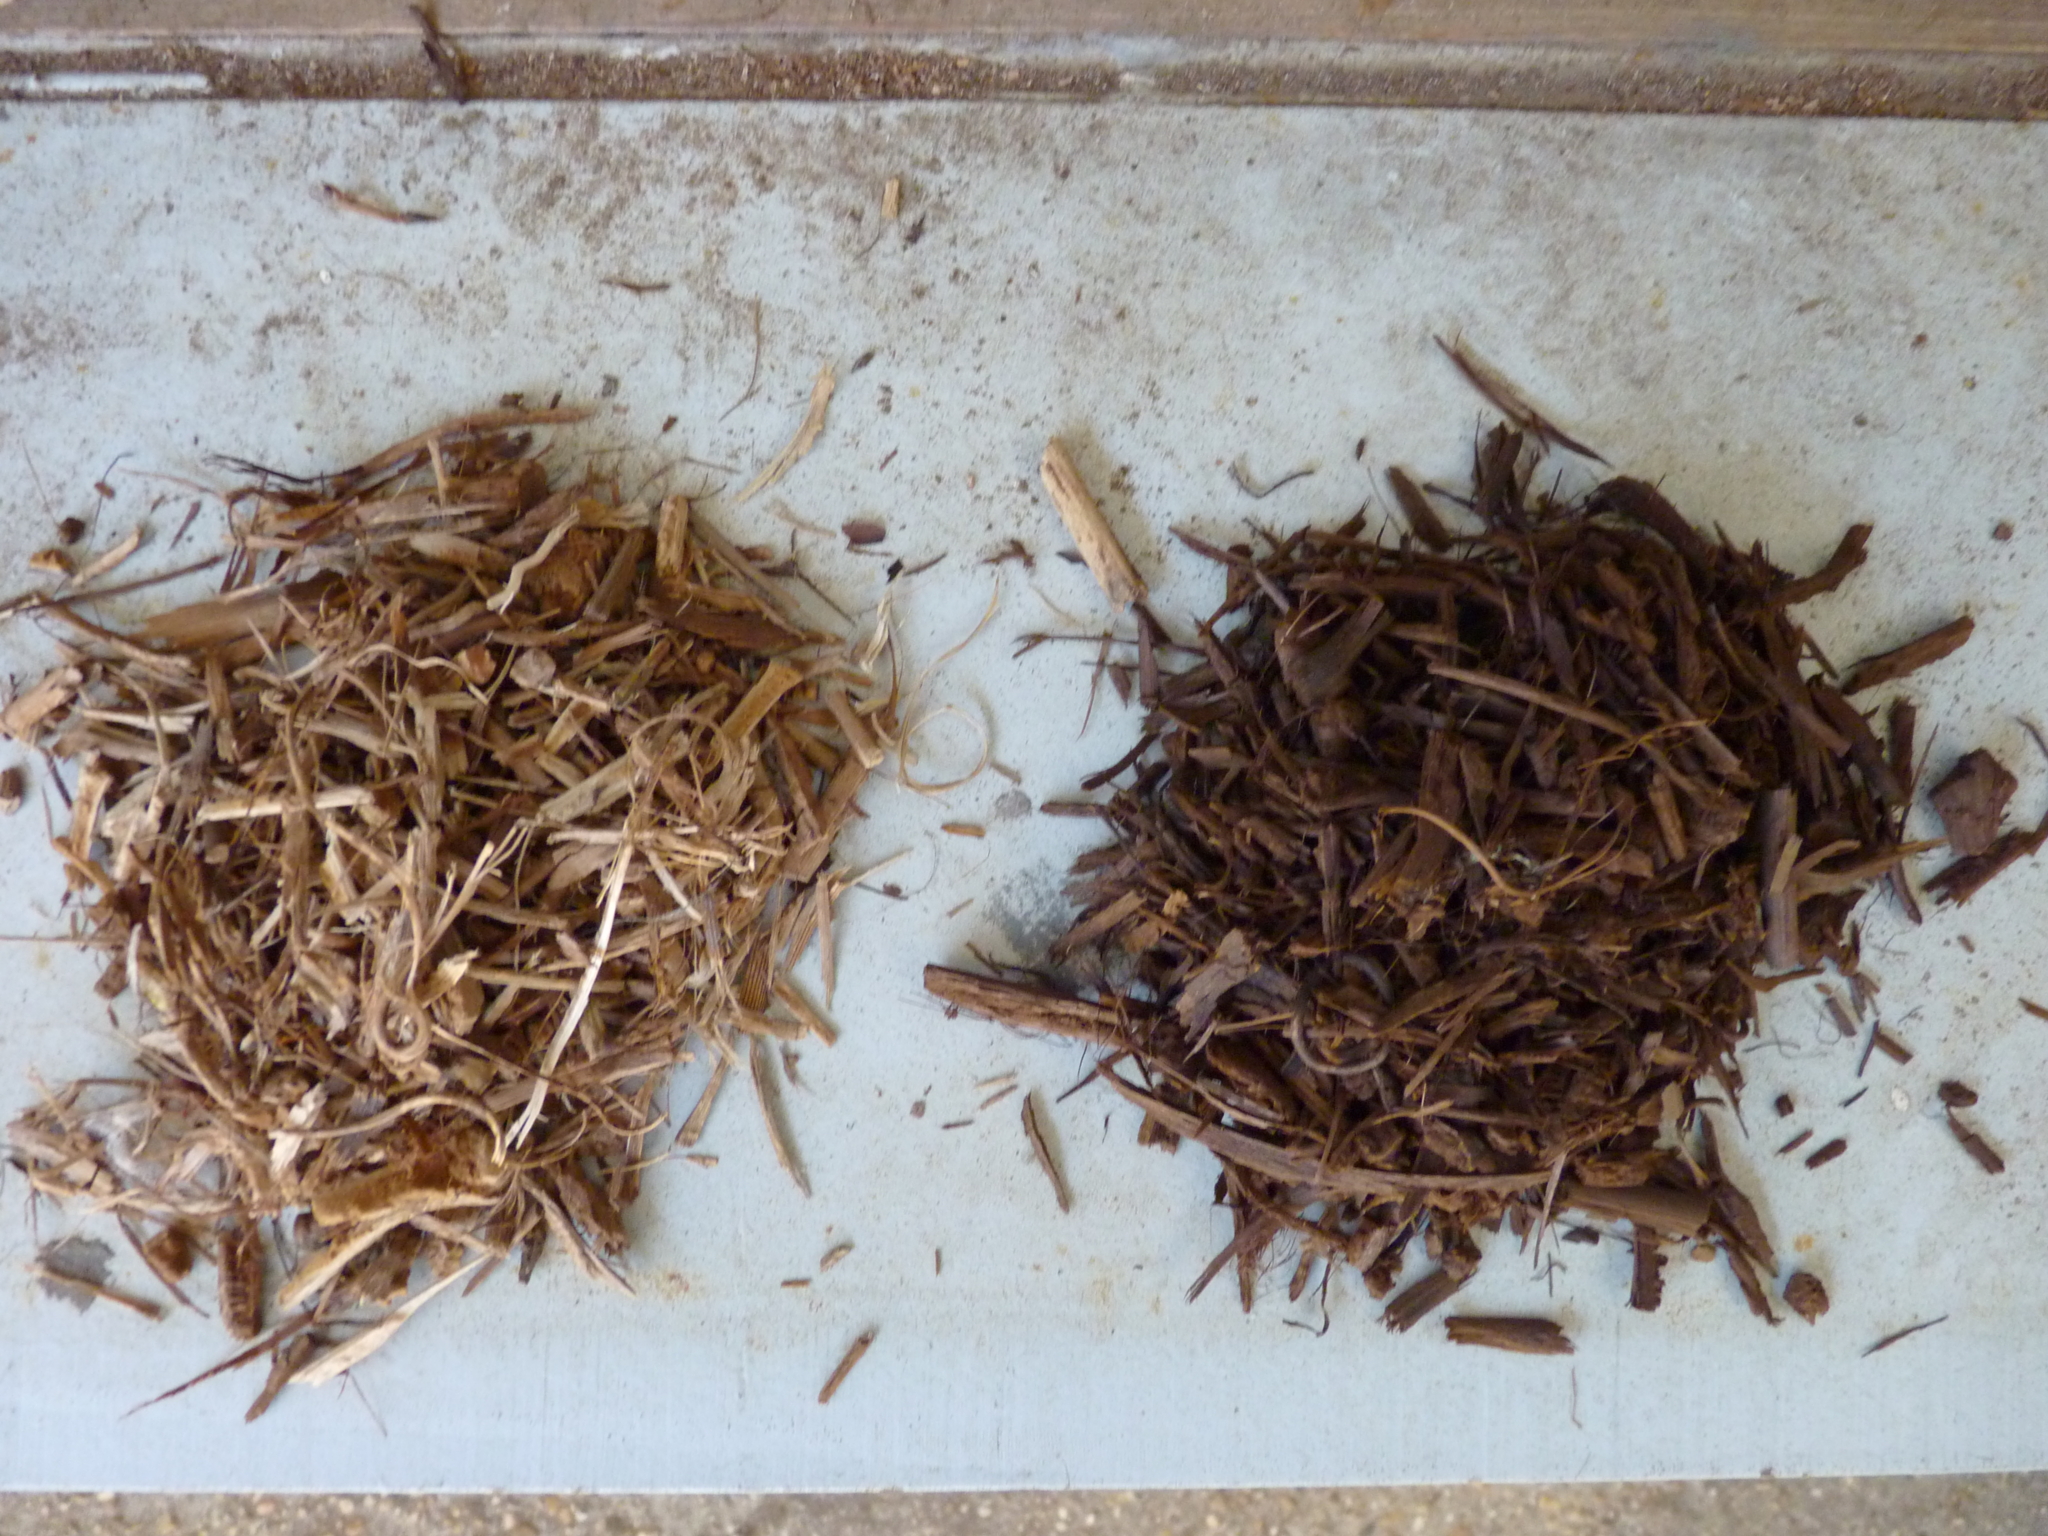 Two piles of shredded biomass (different particle sizes) shown against a neutral background. The pile on the left-hand side is characterised by a light, voluminous material. The pile on the right-hand side is composed of a more compact and darker material